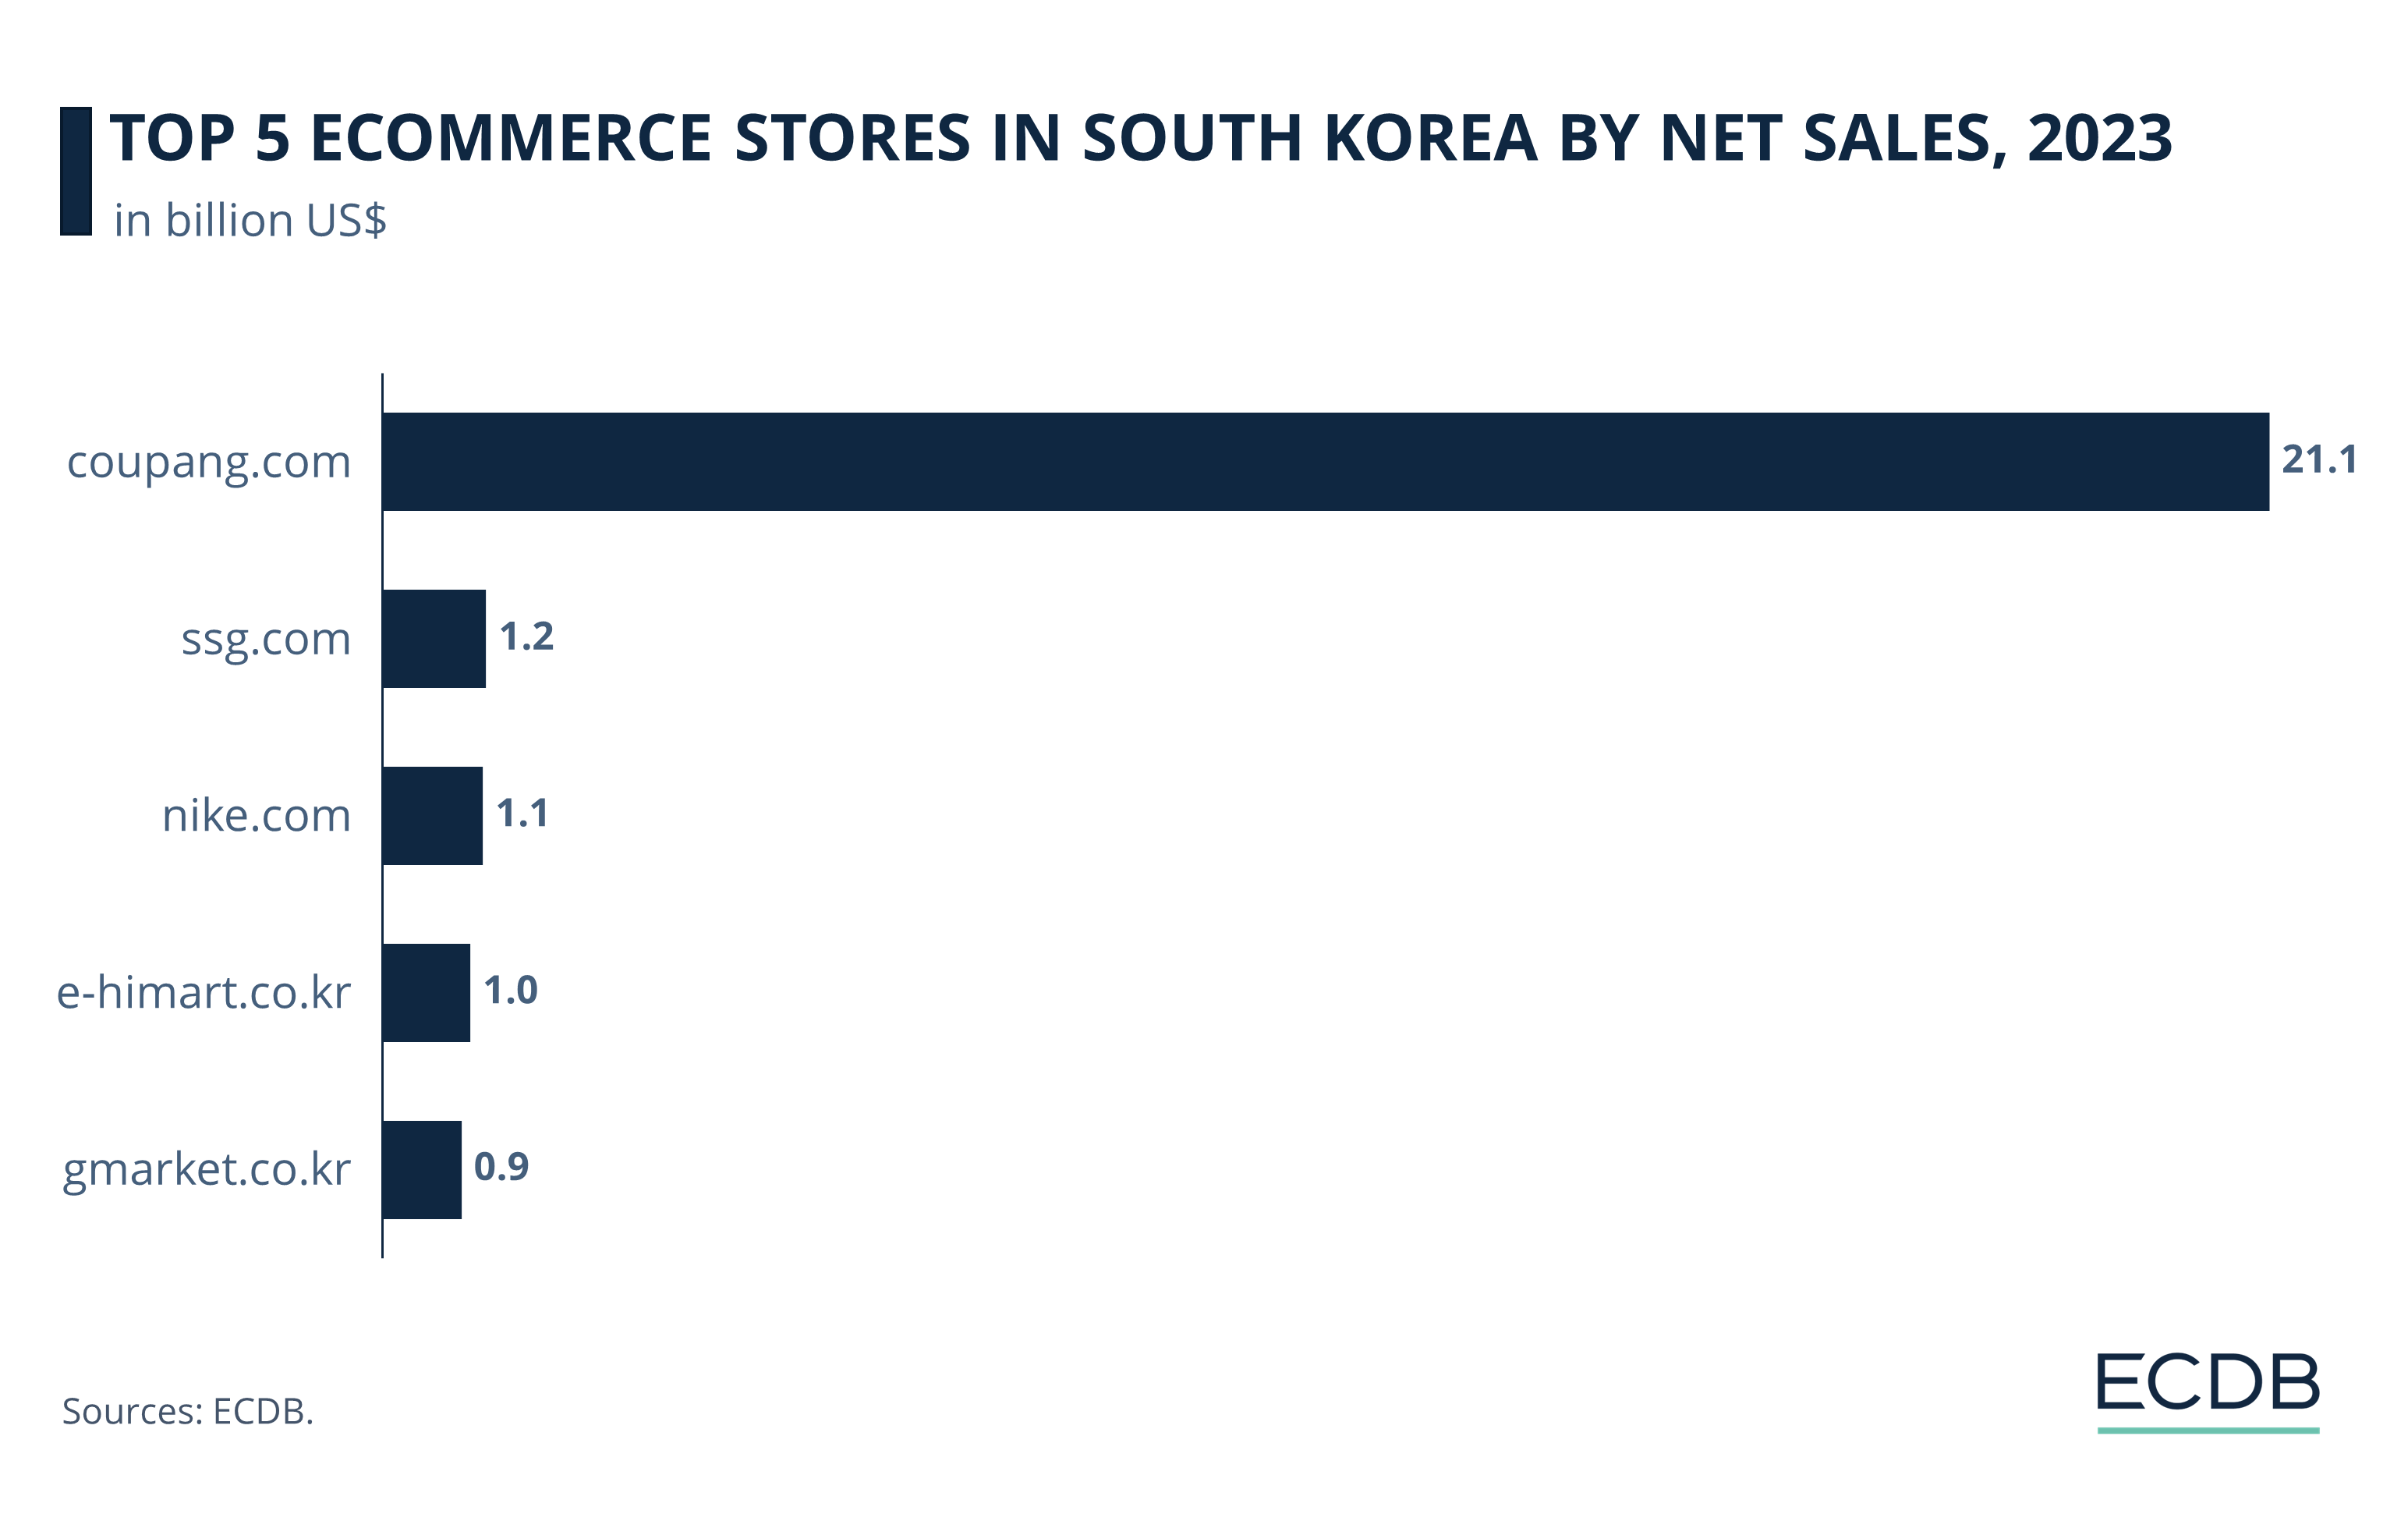 Top 5 eCommerce Stores in South Korea by Net Sales, 2022